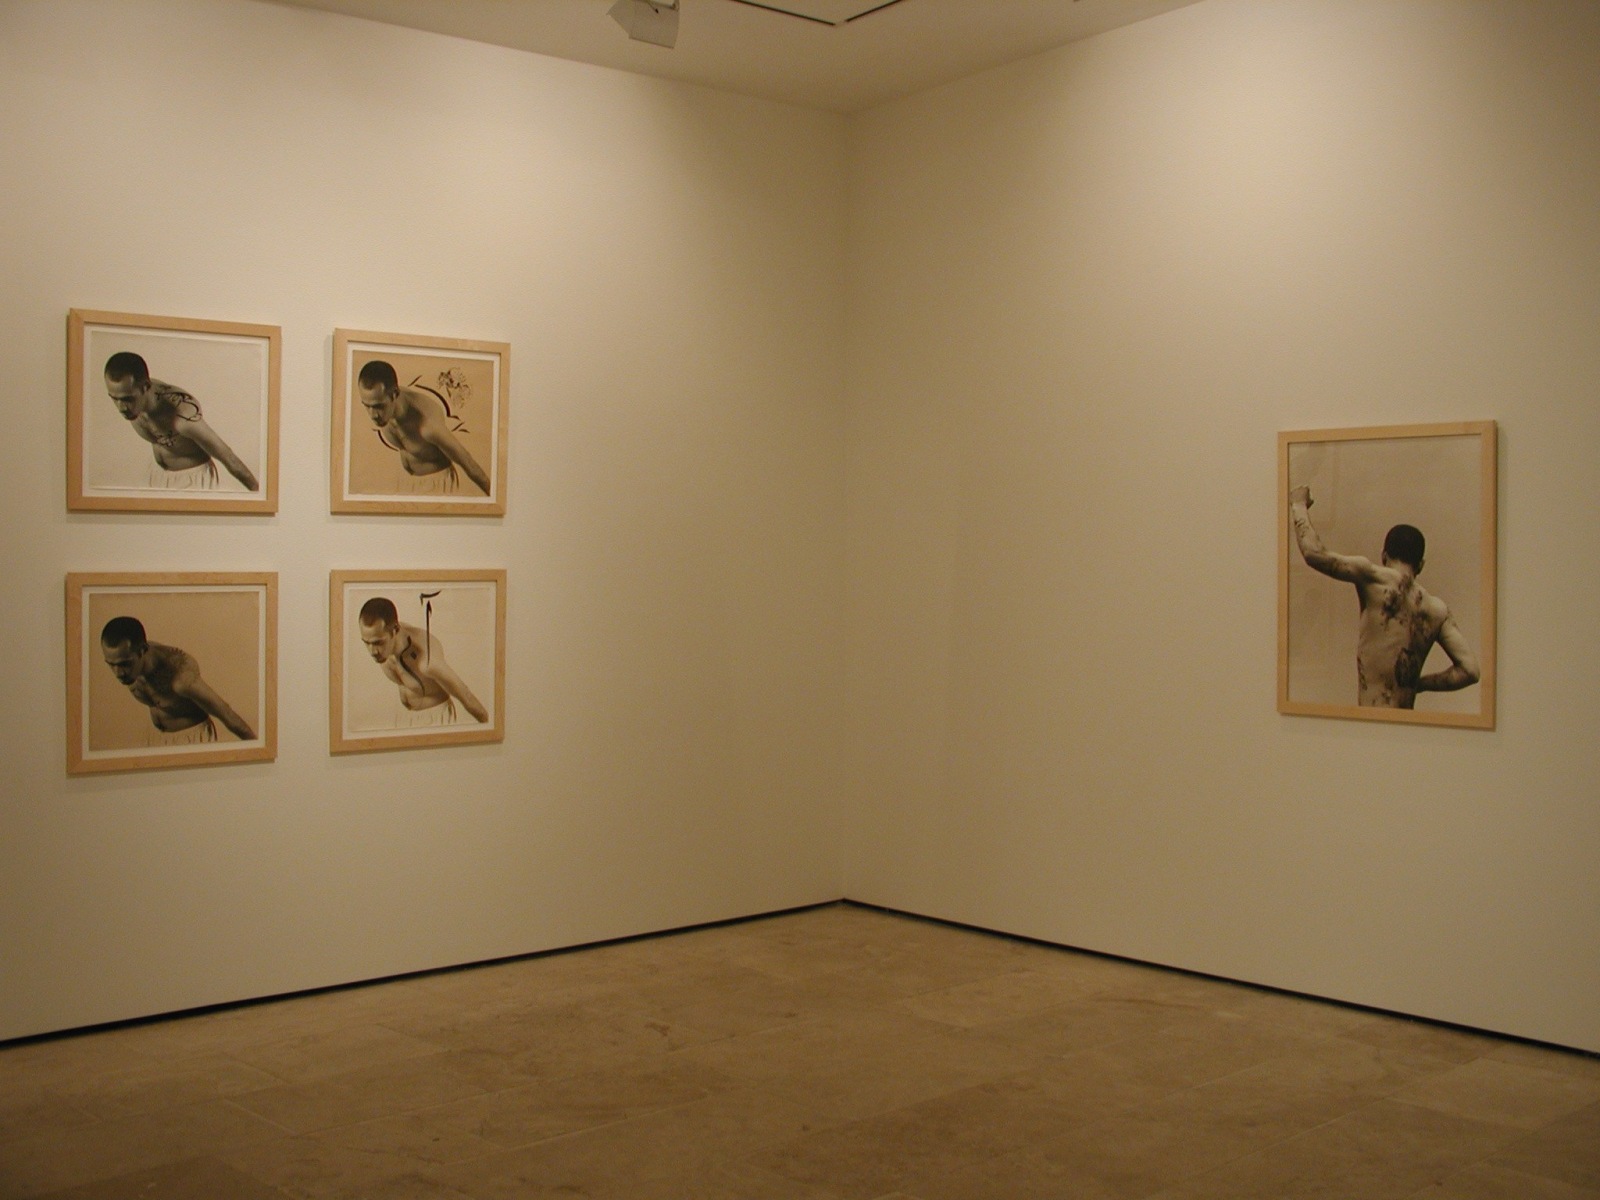 Five framed photographs in the exhibition Sadegh Tirafkan at Lehmann Maupin in New York in 2004